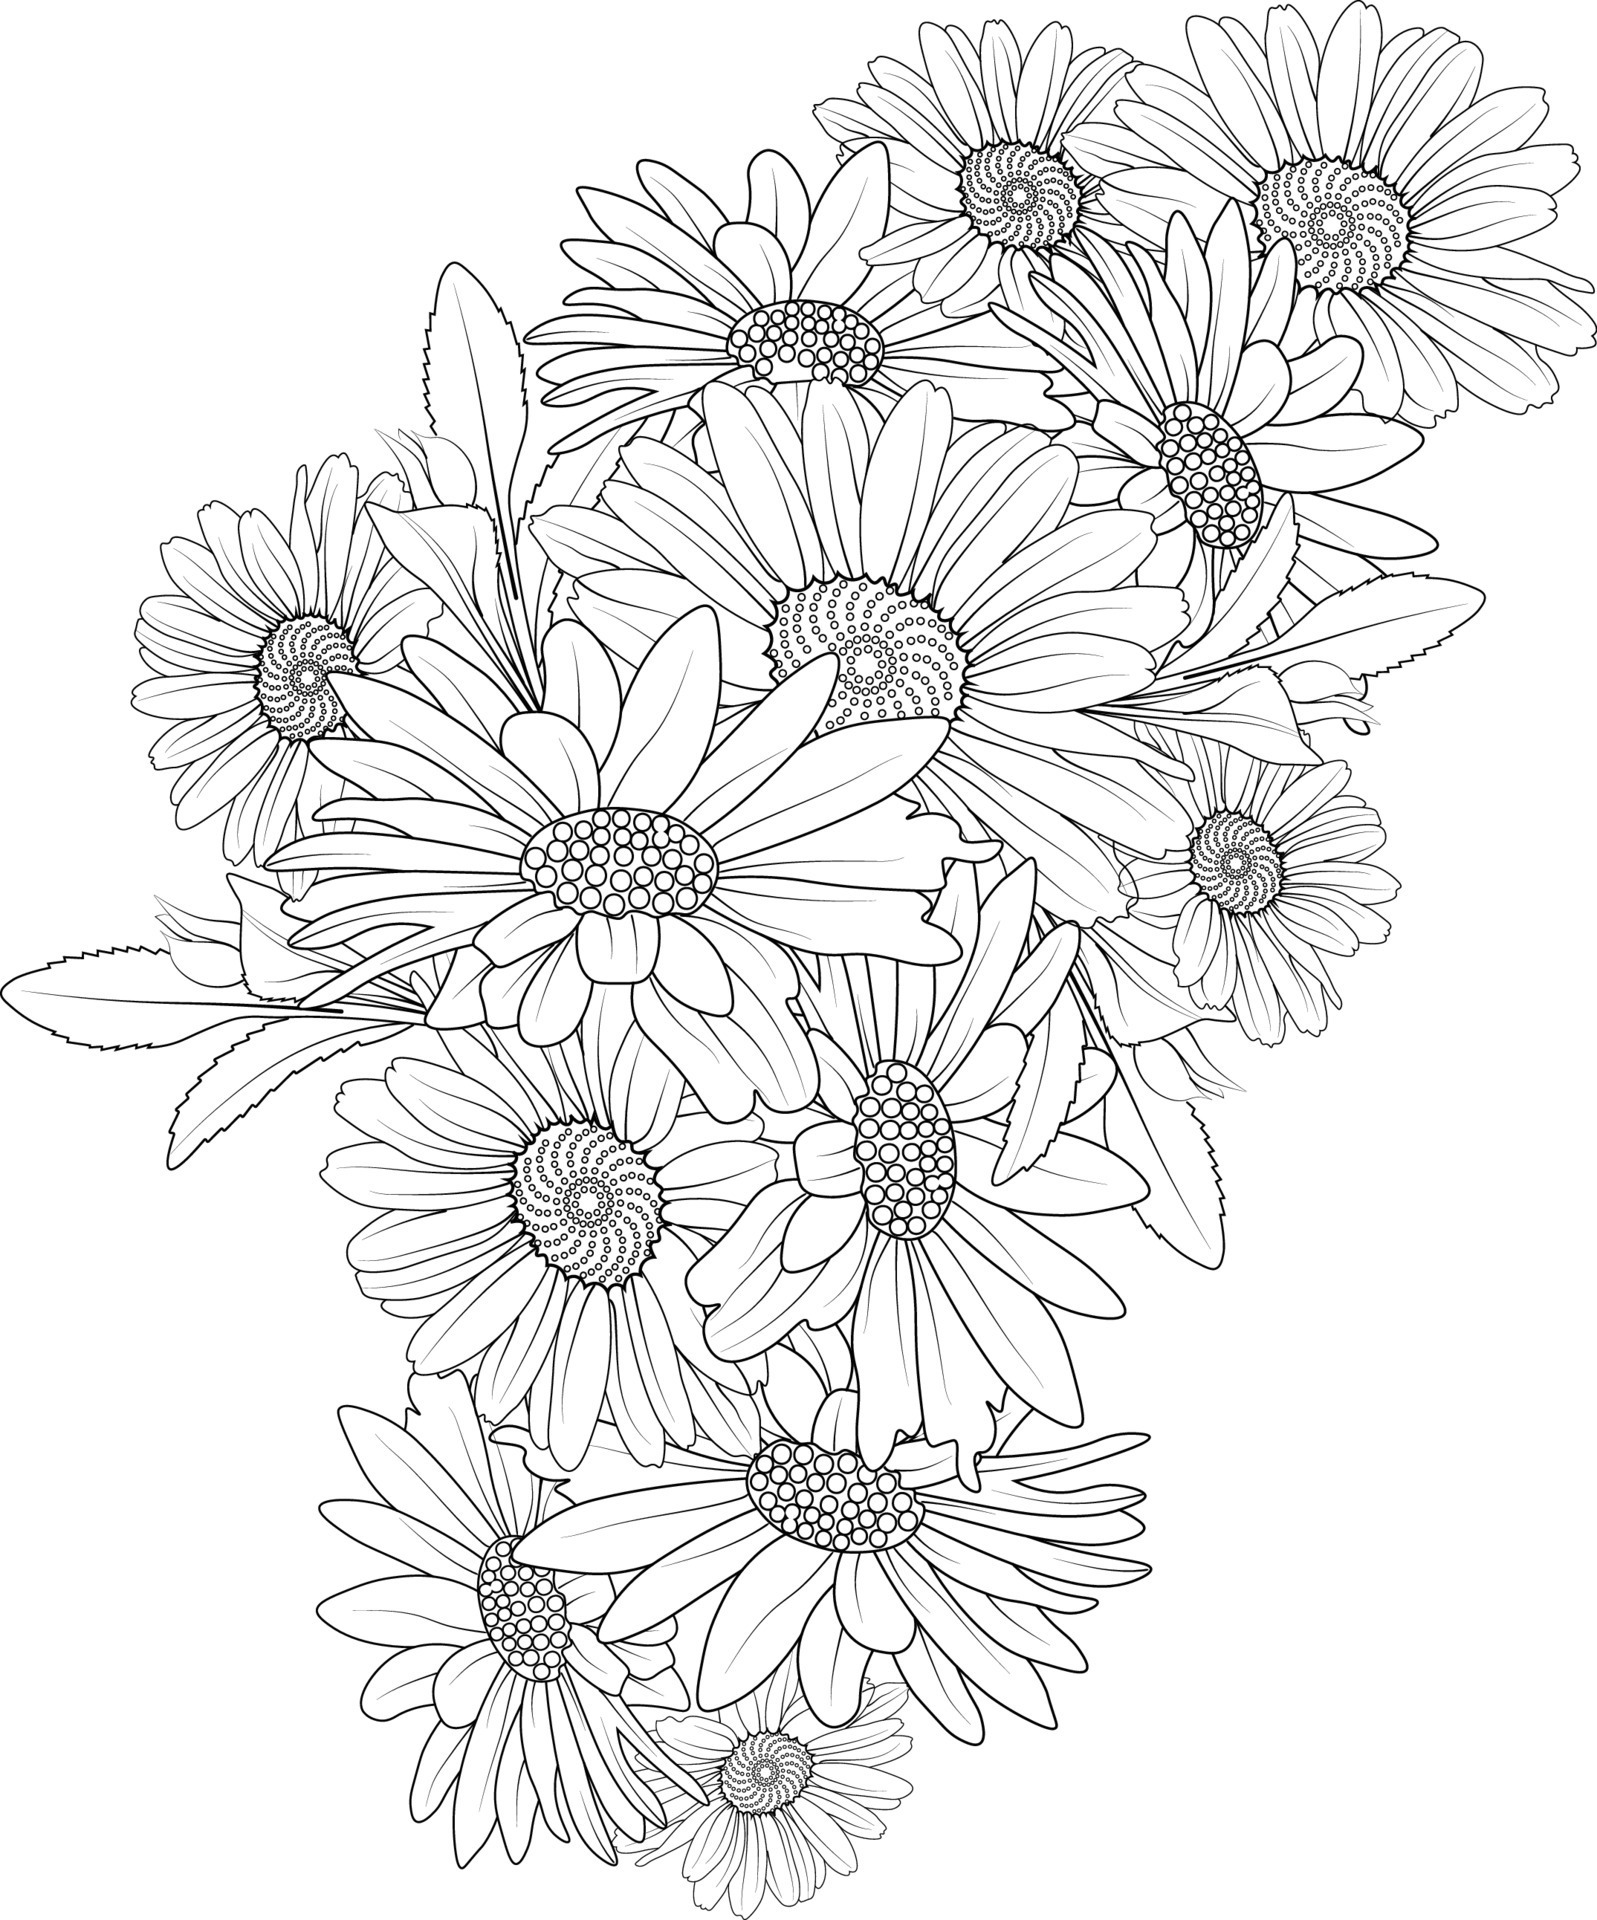 Abstract 3 Daisies One Line Drawing Stock Vector Royalty Free 1955195989   Shutterstock  Line drawing tattoos Daisy tattoo designs Small daisy  tattoo